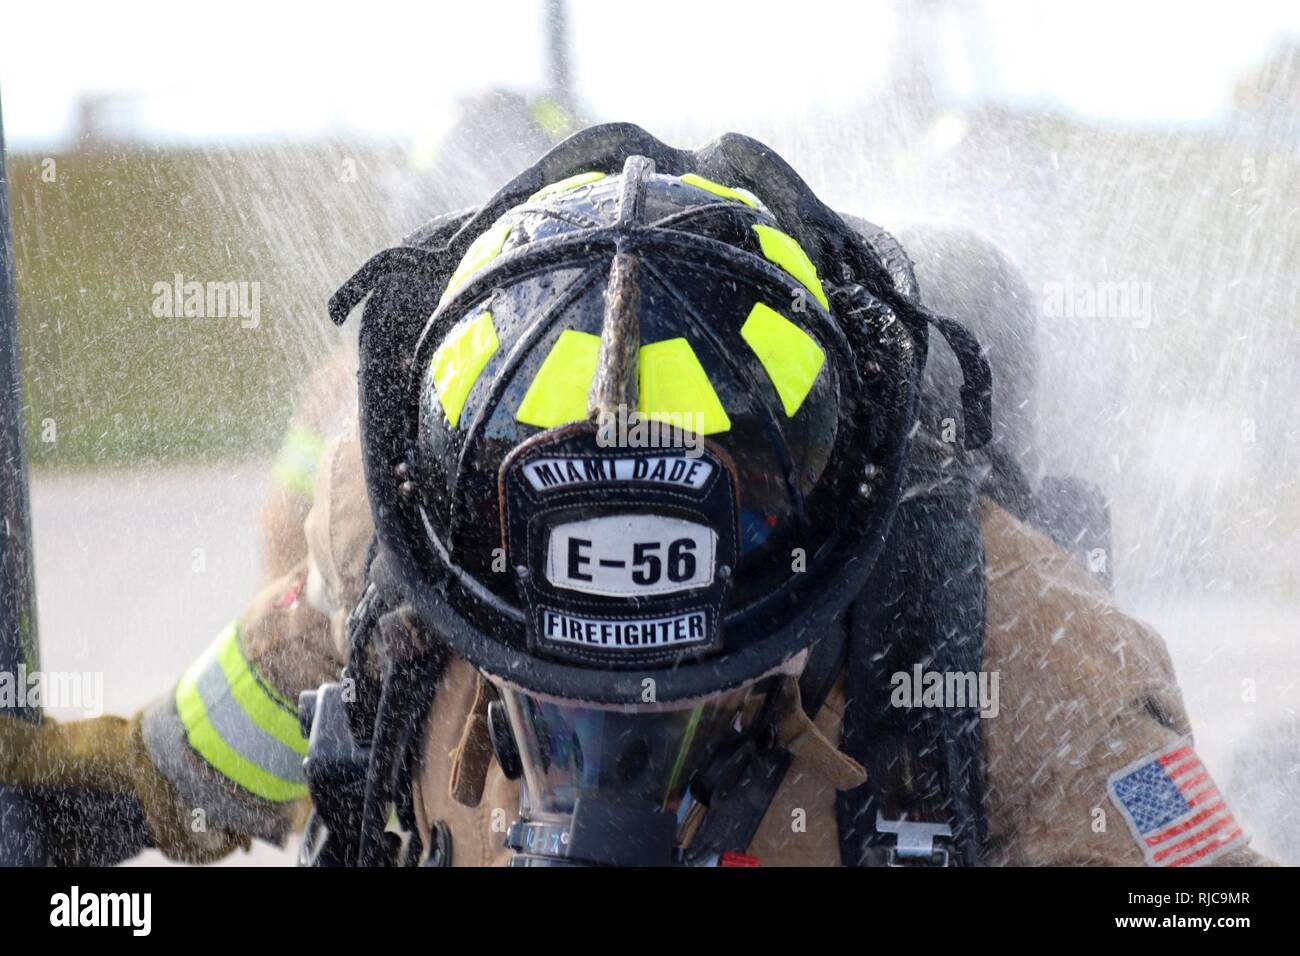 Ramon Veloso of the Miami-Dade Fire Department Hazmat team walks through the decontamination shower during a Joint Training Exercise hosted by the Miami-Dade Fire Department and Homestead-Miami Speedway in Miami, Fla. Jan. 11, 2018. This JTE focused on building response capabilities and seamless the transition between the local first responders and the follow-on support provided by the National Guard and Active duty soldiers. (U. S. Army Stock Photo